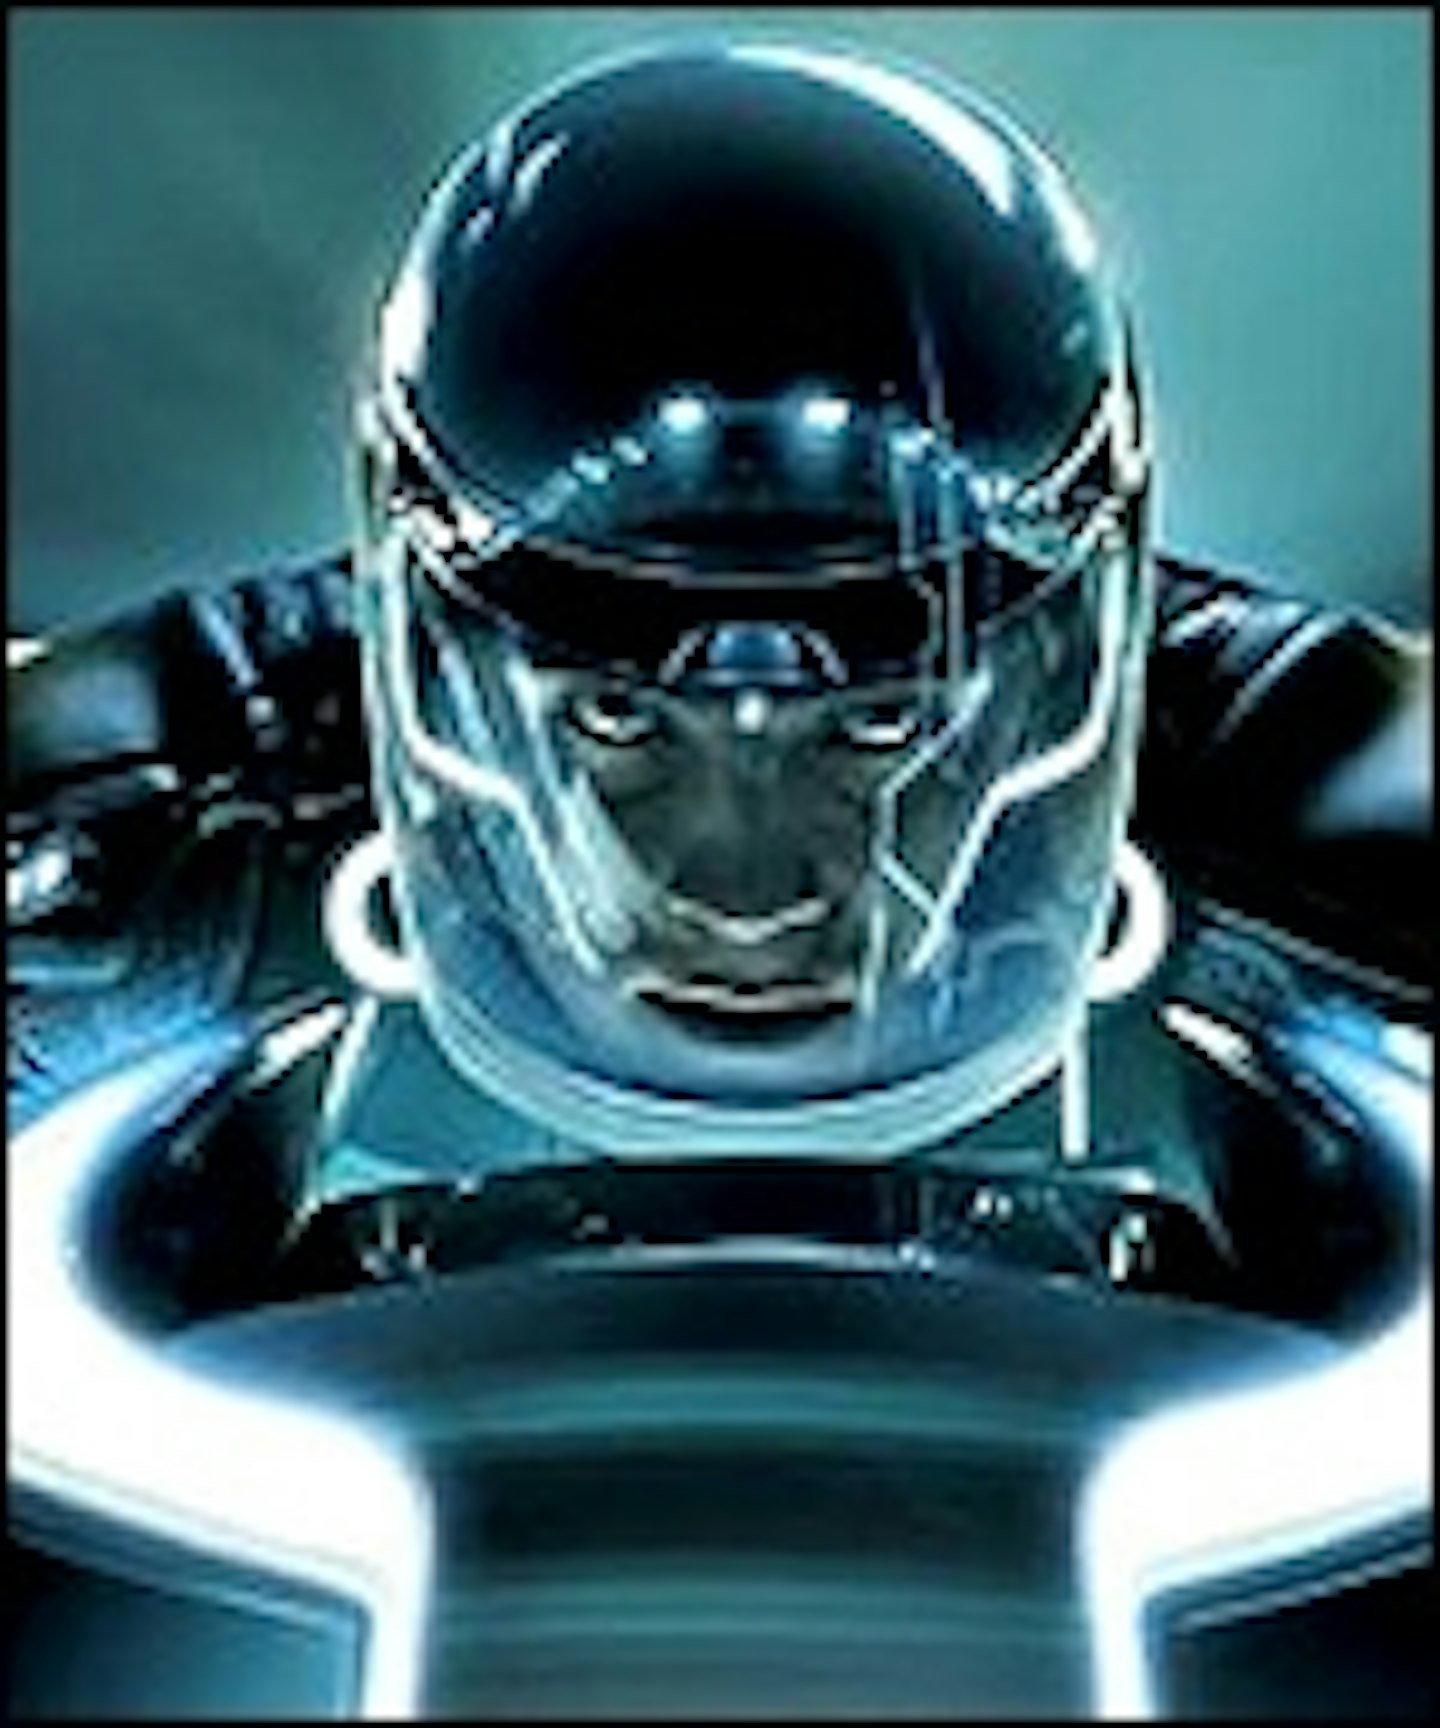 On Yer Bike: New Tron Pictures